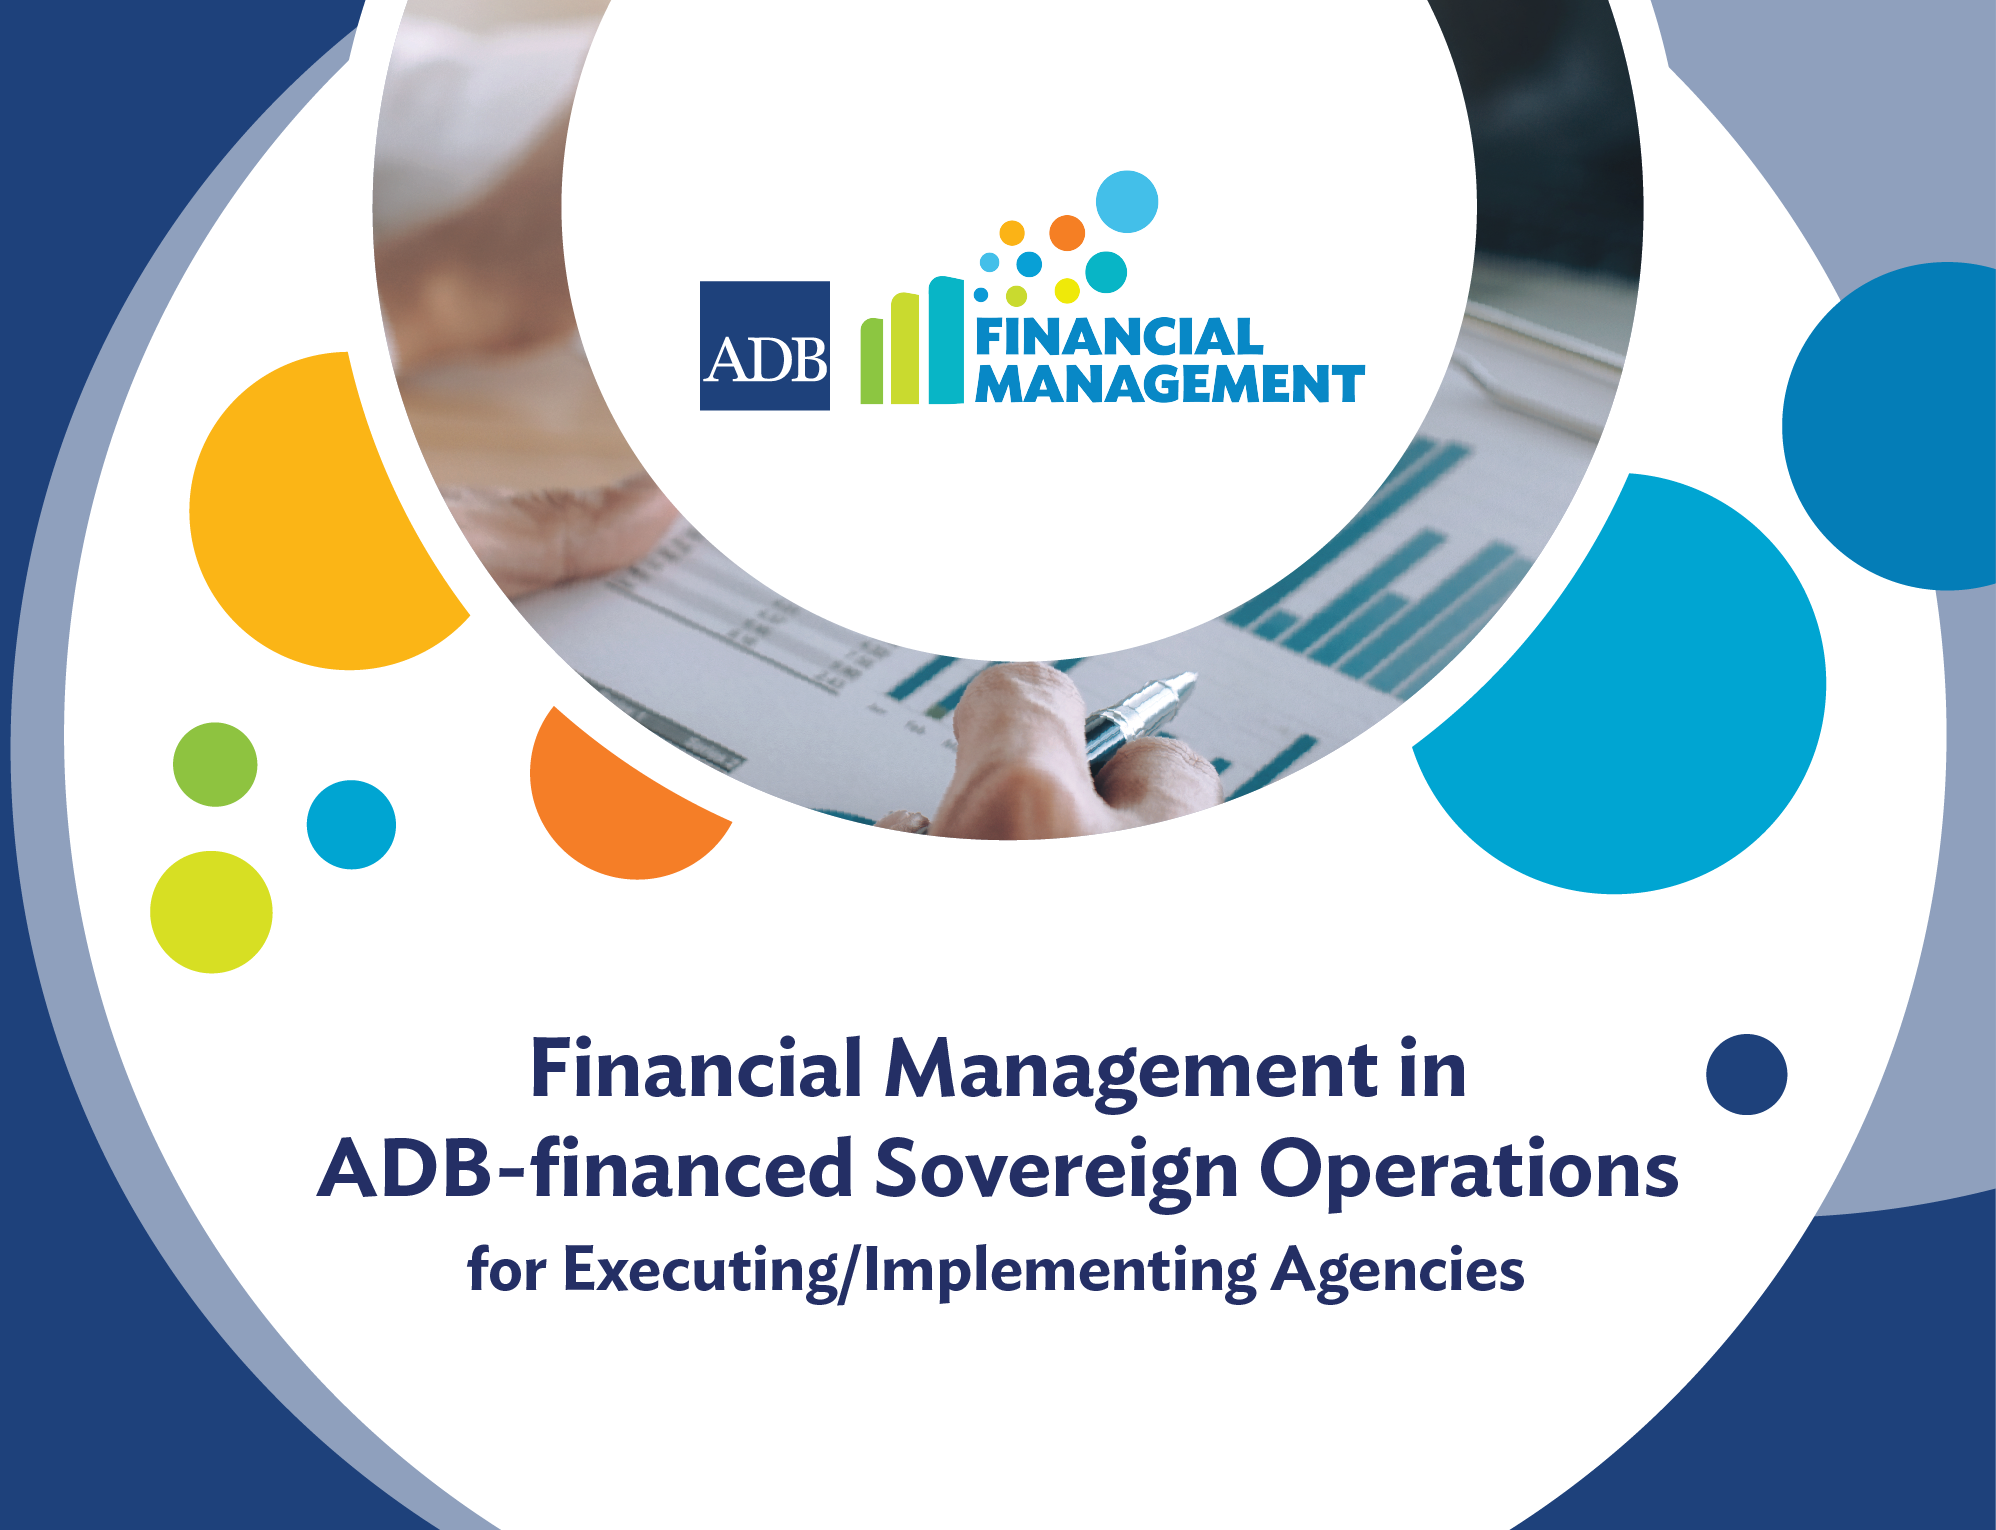 Financial Management in ADB-Financed Sovereign Operations for Executing/Implementing Agencies